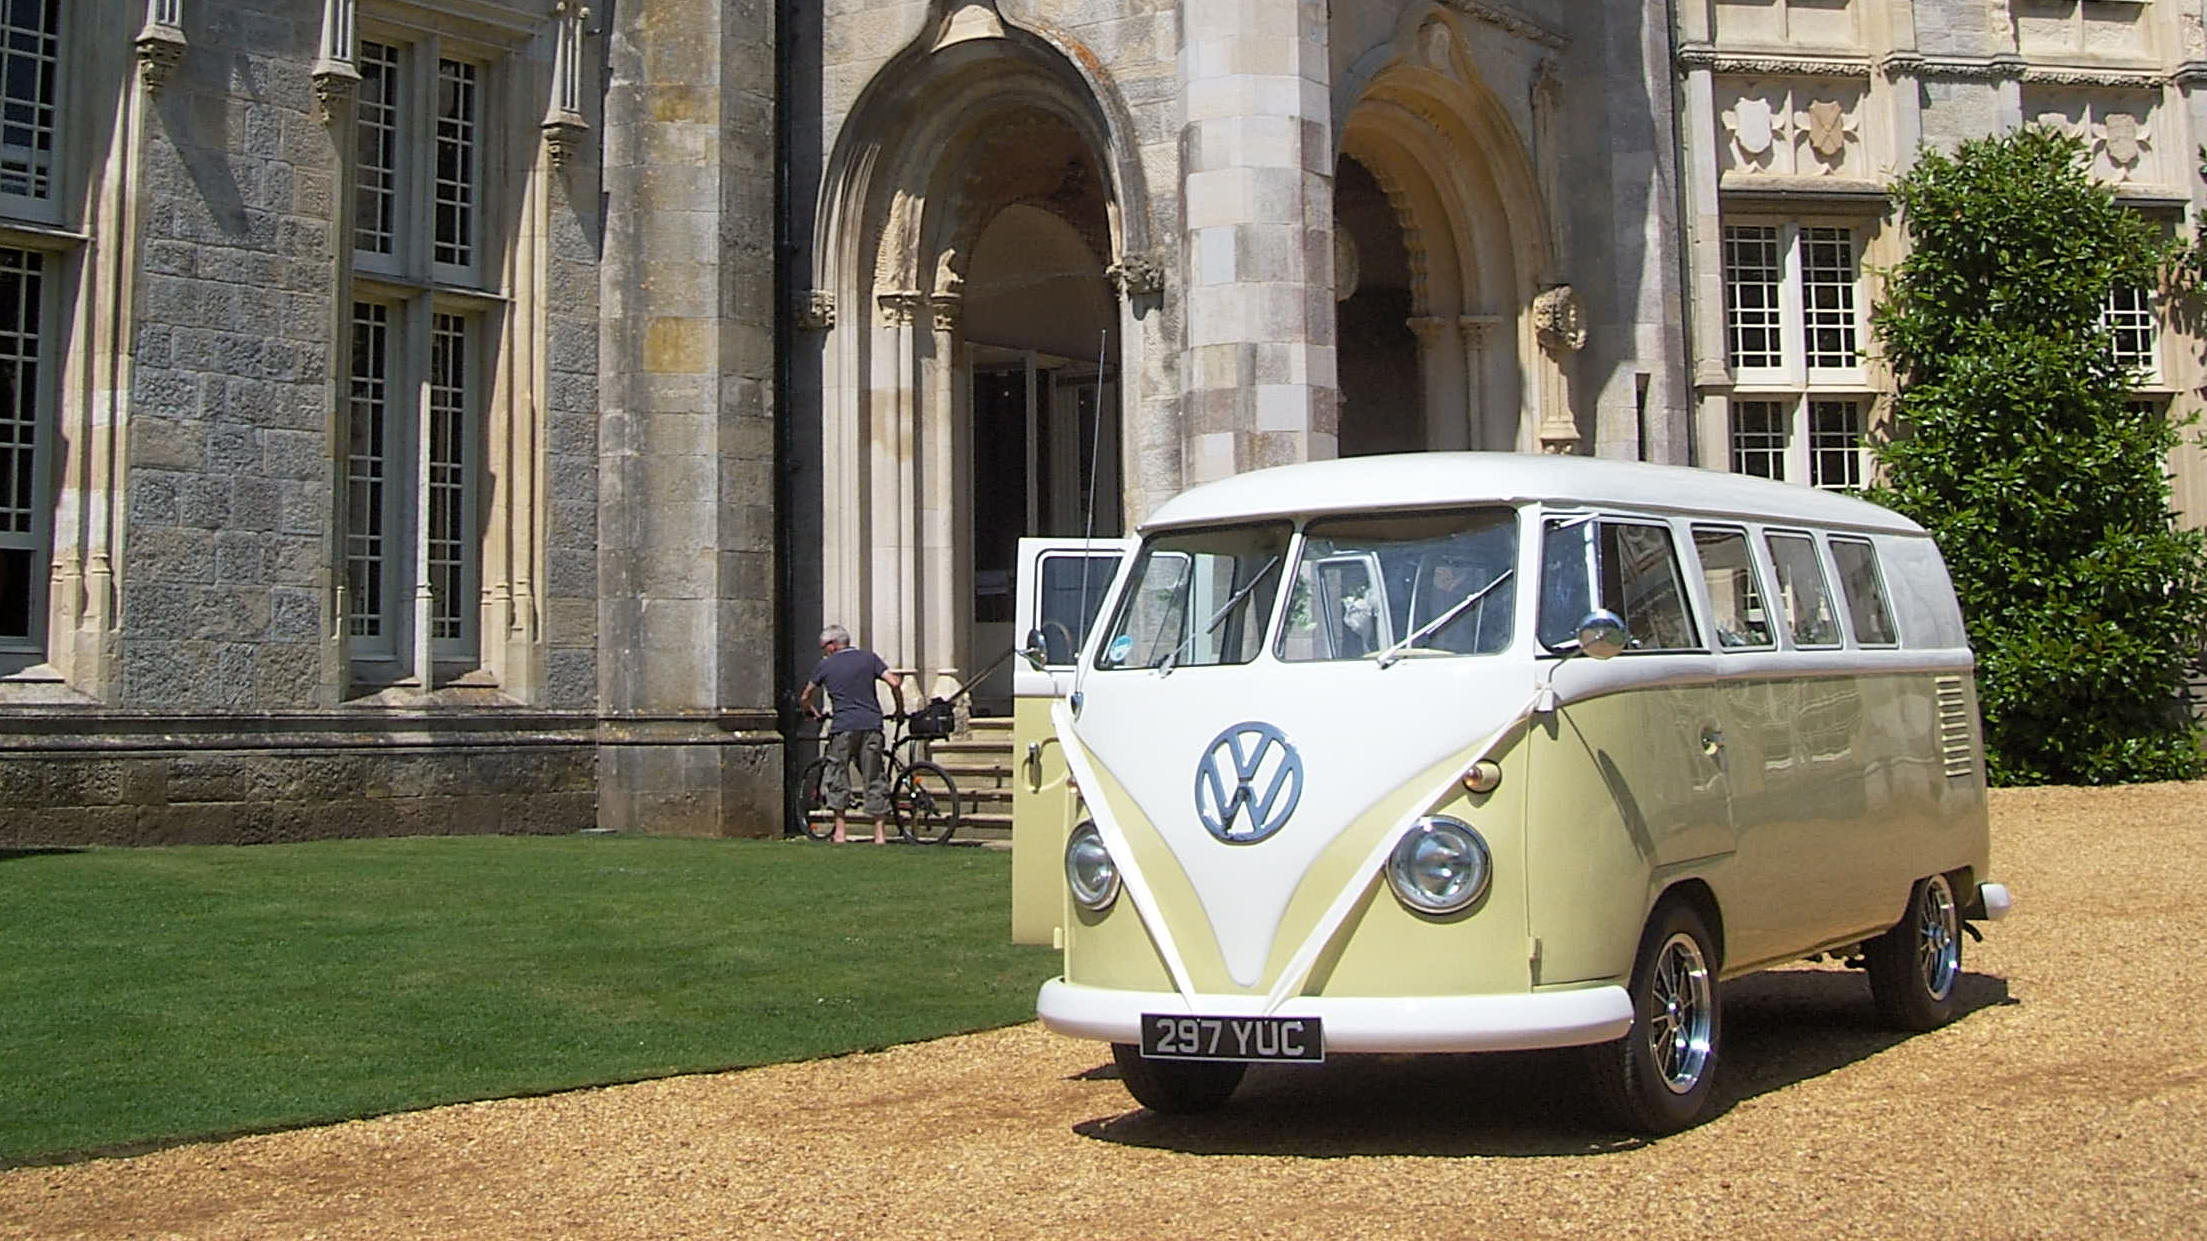 Retro Classic Volkswagen Campervan decorated with white ribbons at a local Burton Bradstock wedding venue.